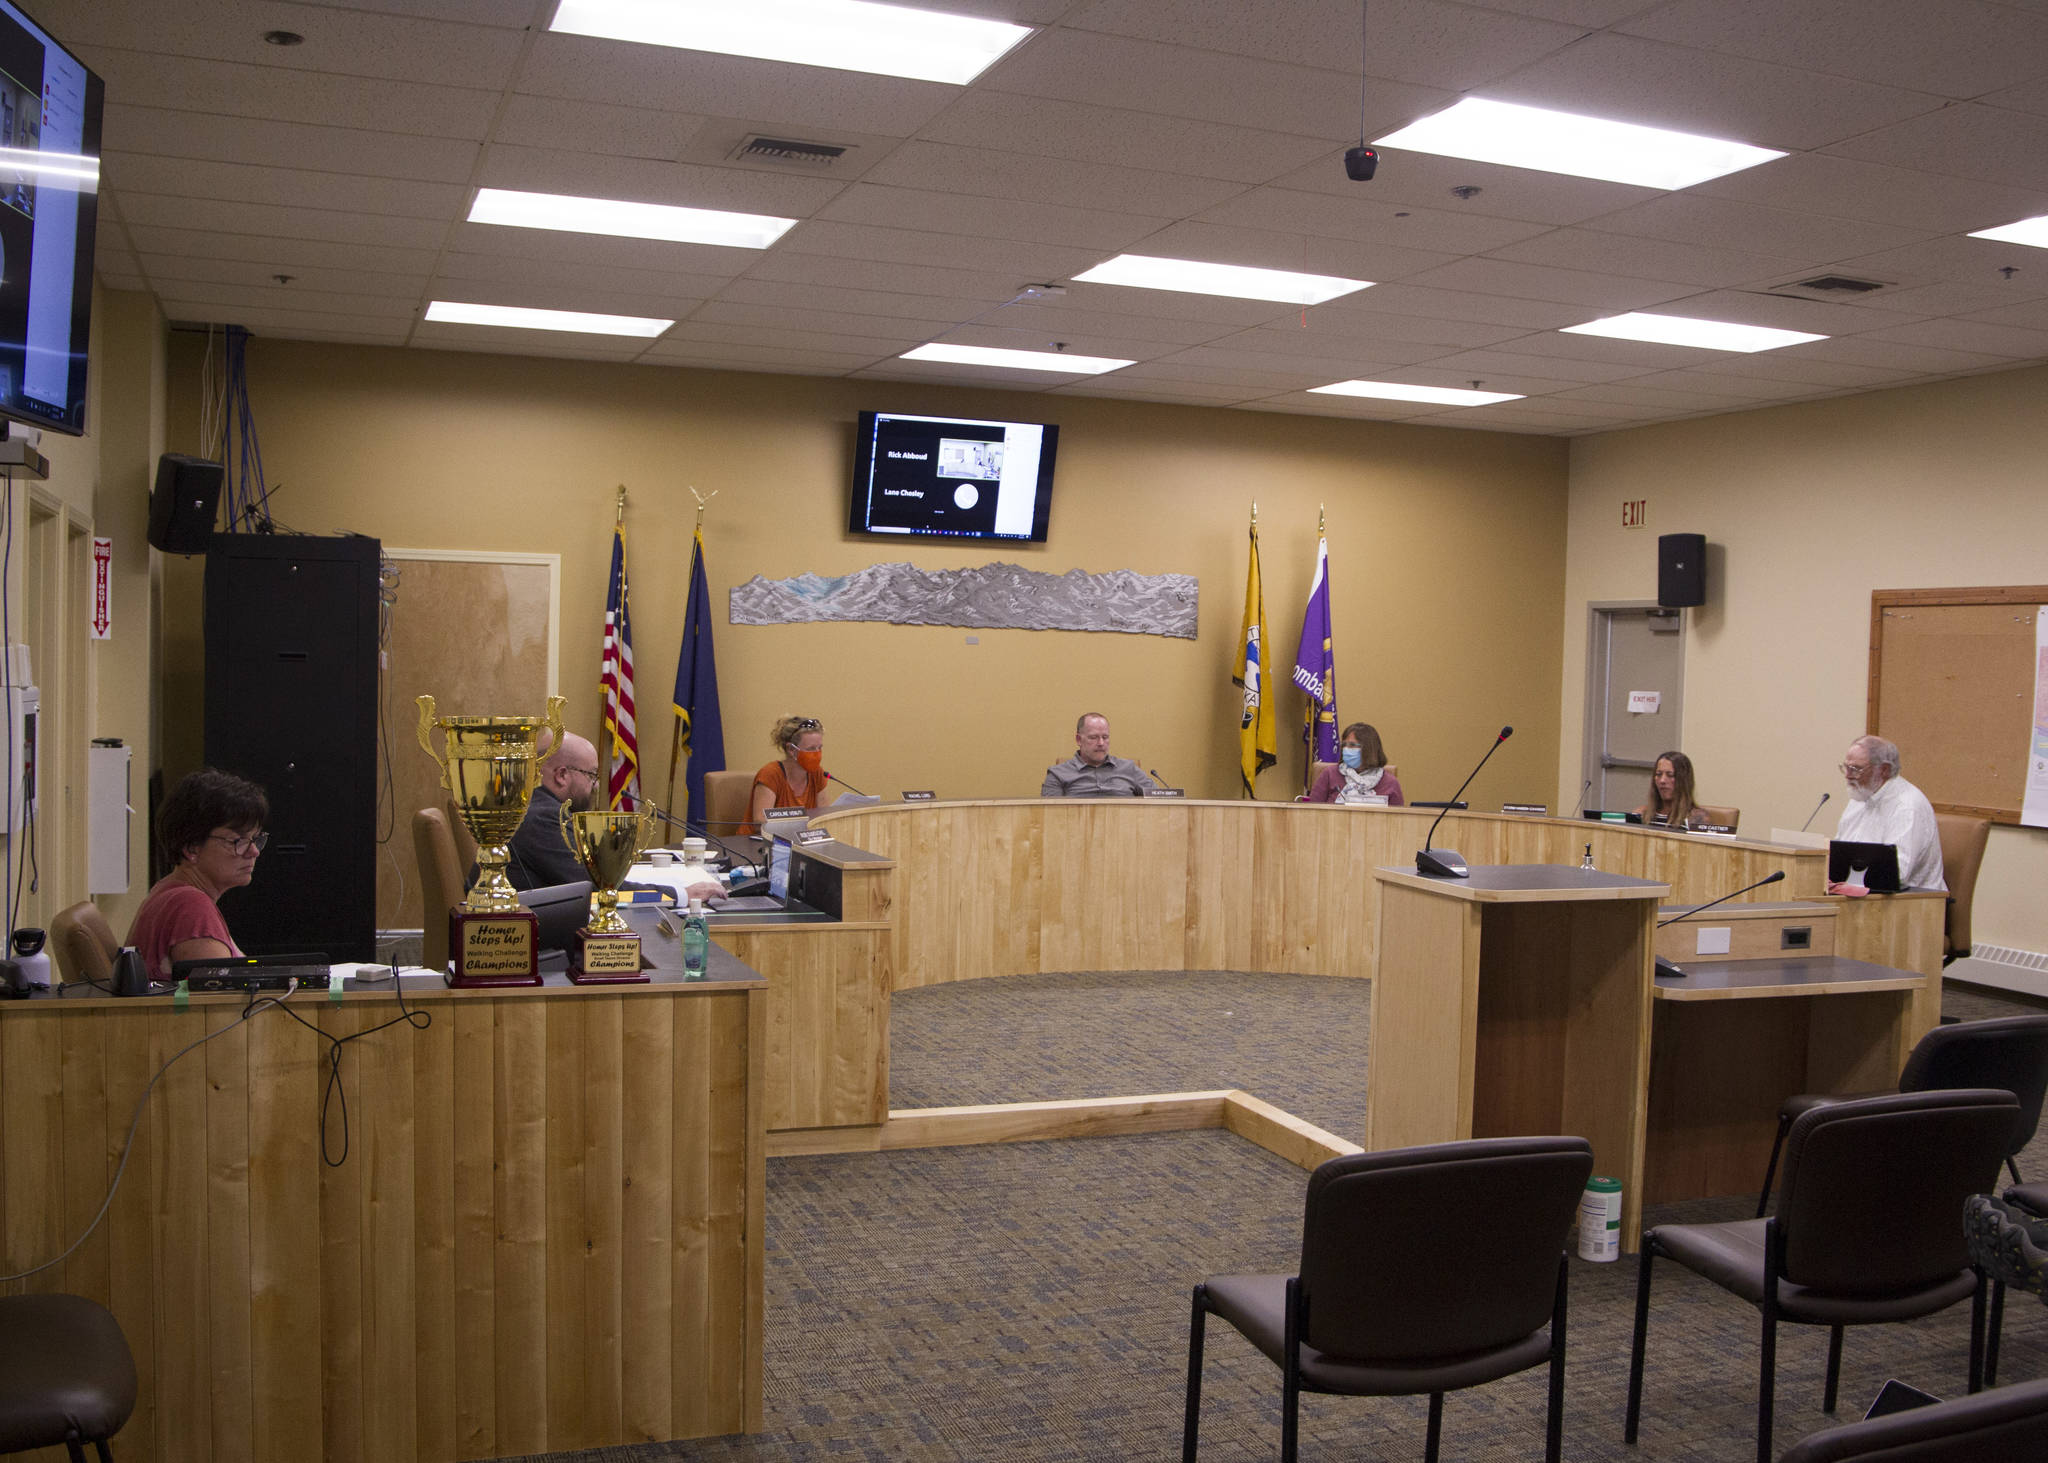 The Homer City Council met in person for the first time in the newly renovated Cowles Council Chamber on July 26. (Photo by Sarah Knapp/Homer News)